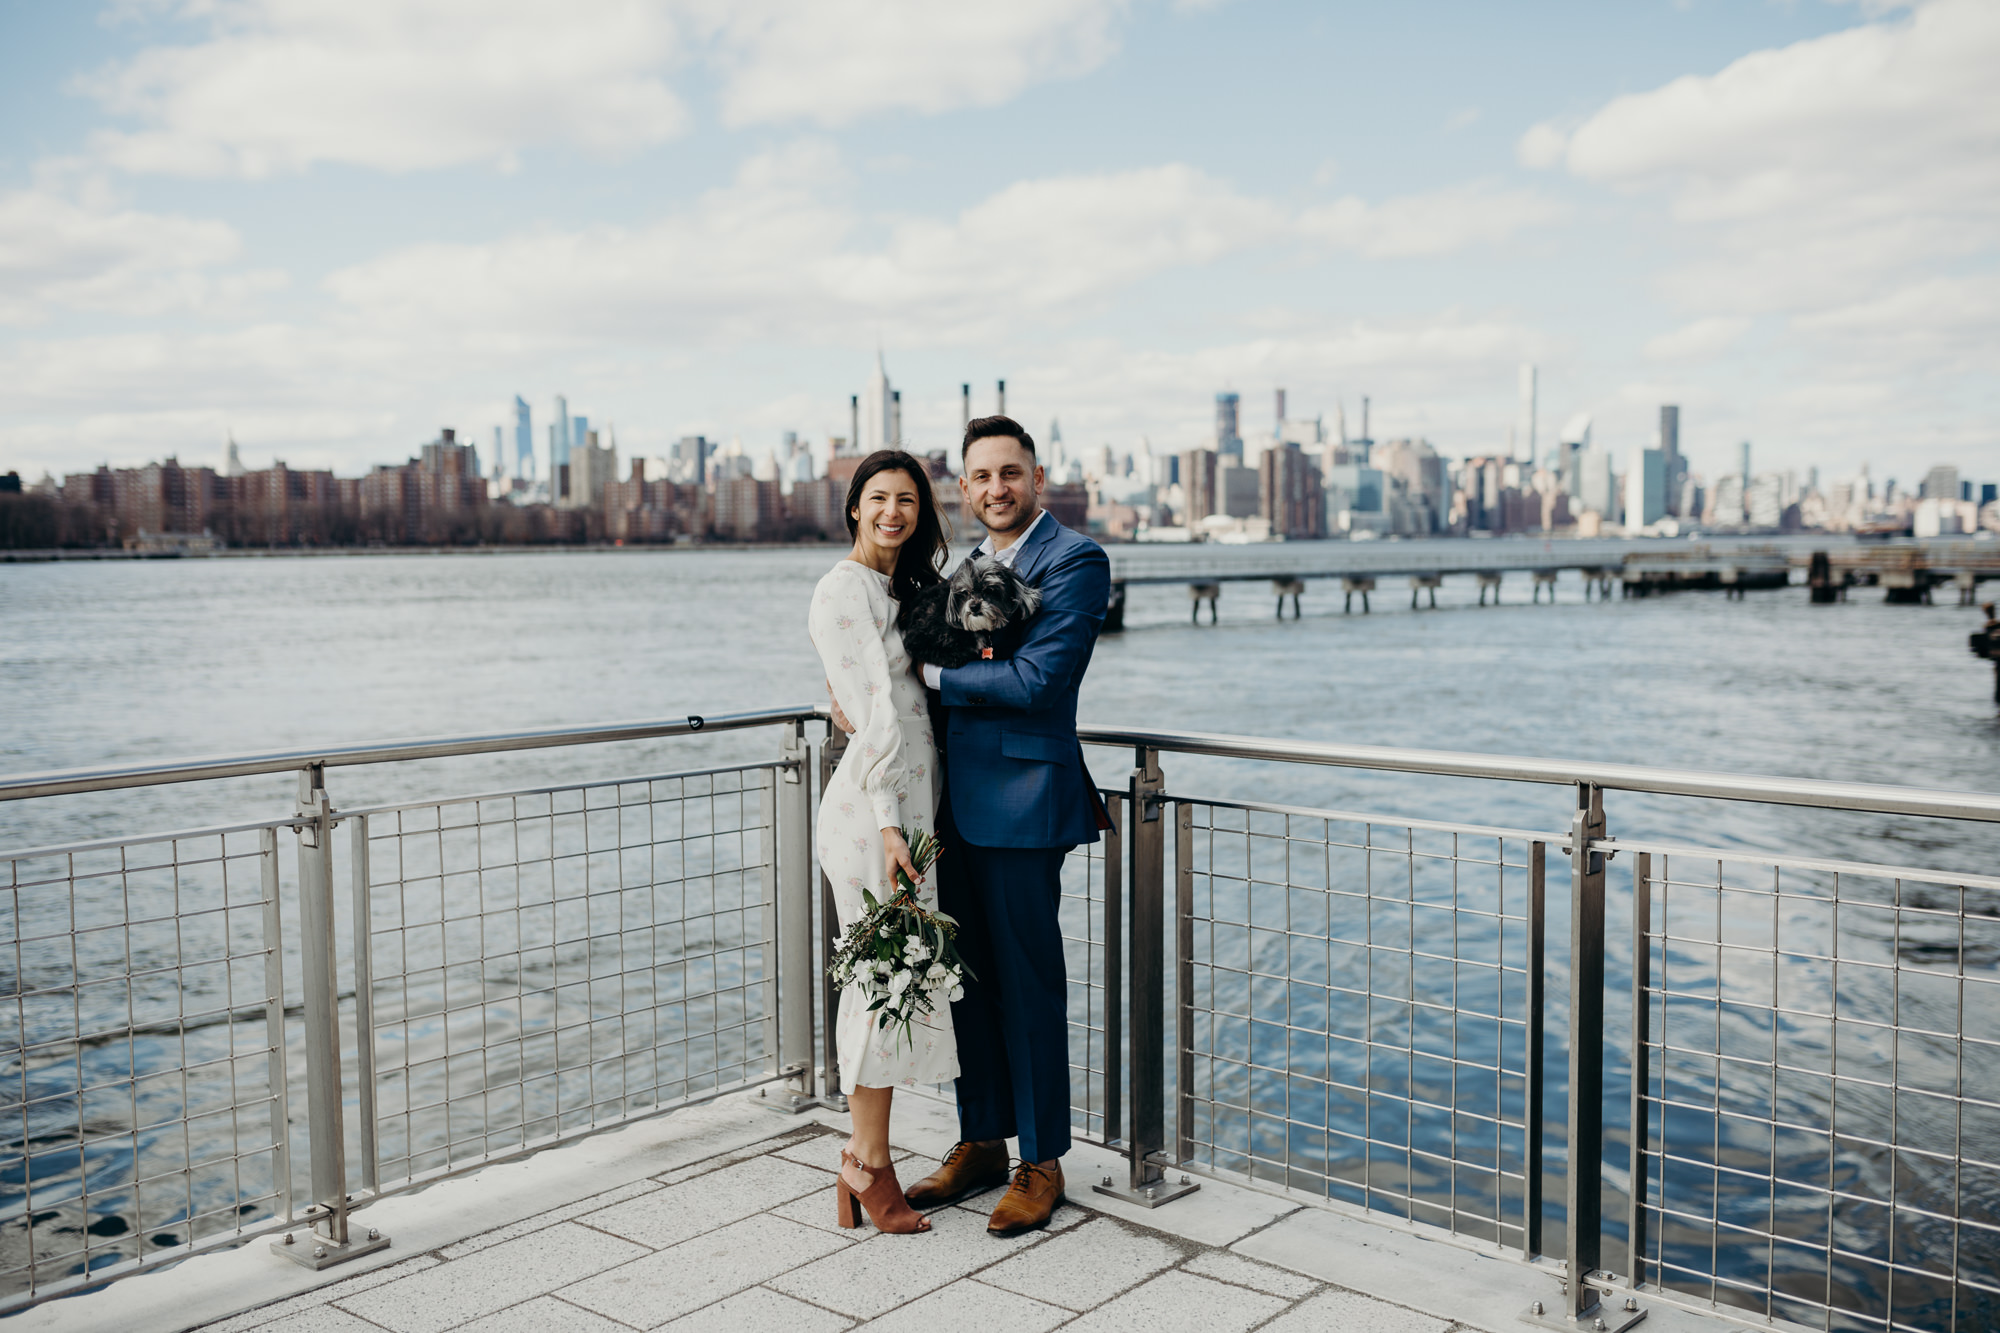 portrait of a bride and groom on their wedding day at domino park in brooklyn, ny